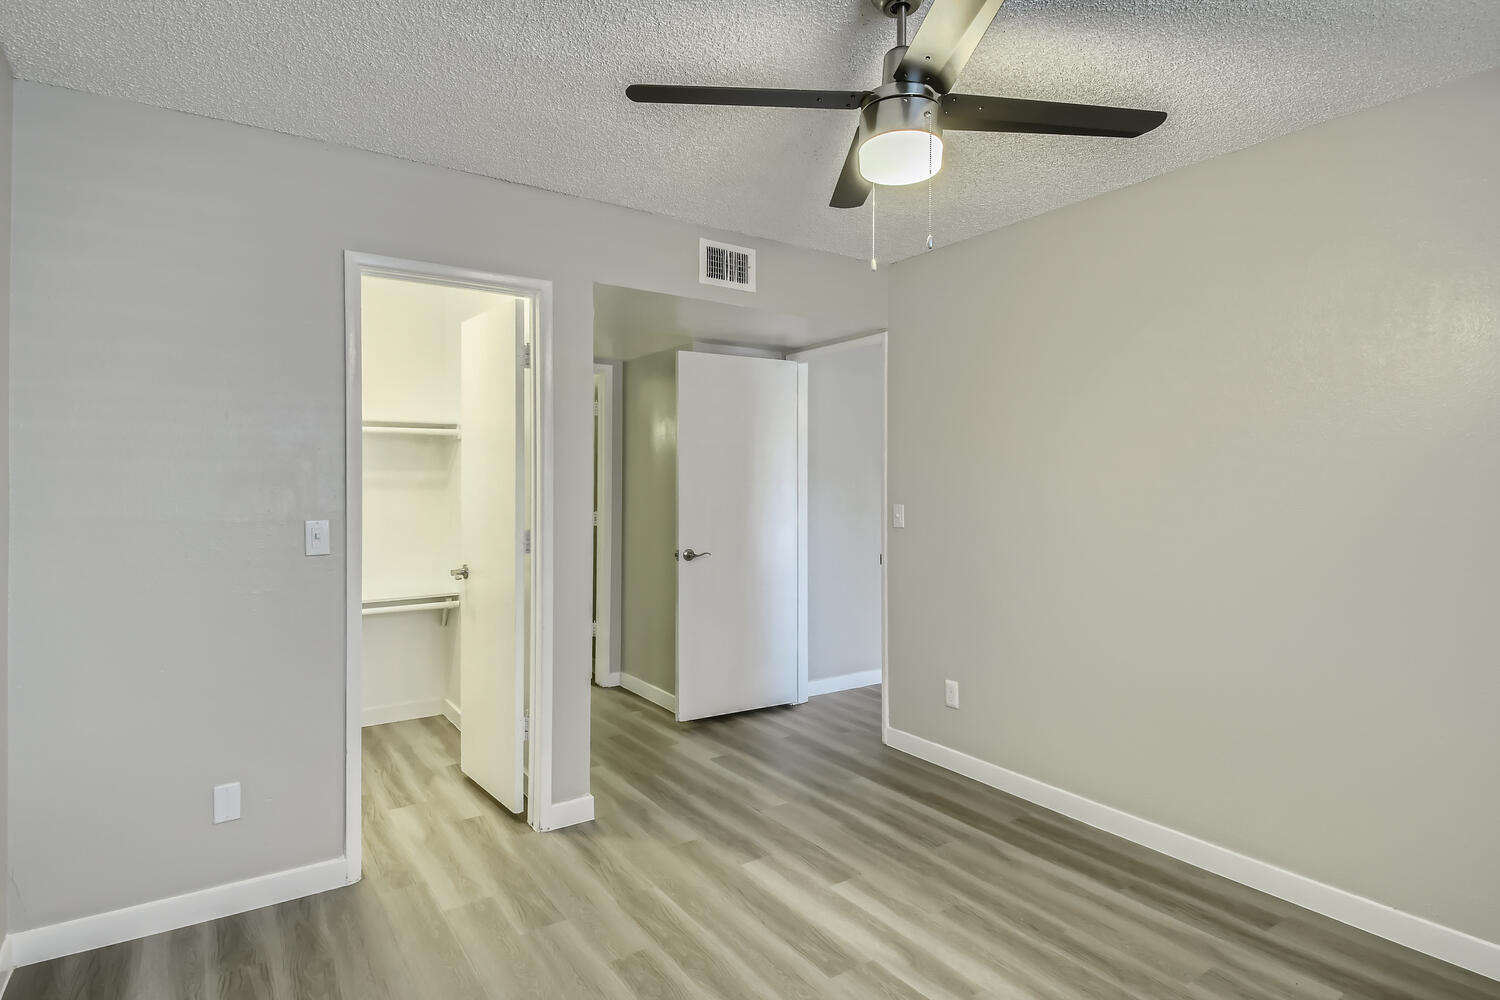 An apartment bedroom with a closet, wood-style flooring, and a ceiling fan at Rise North Ridge.